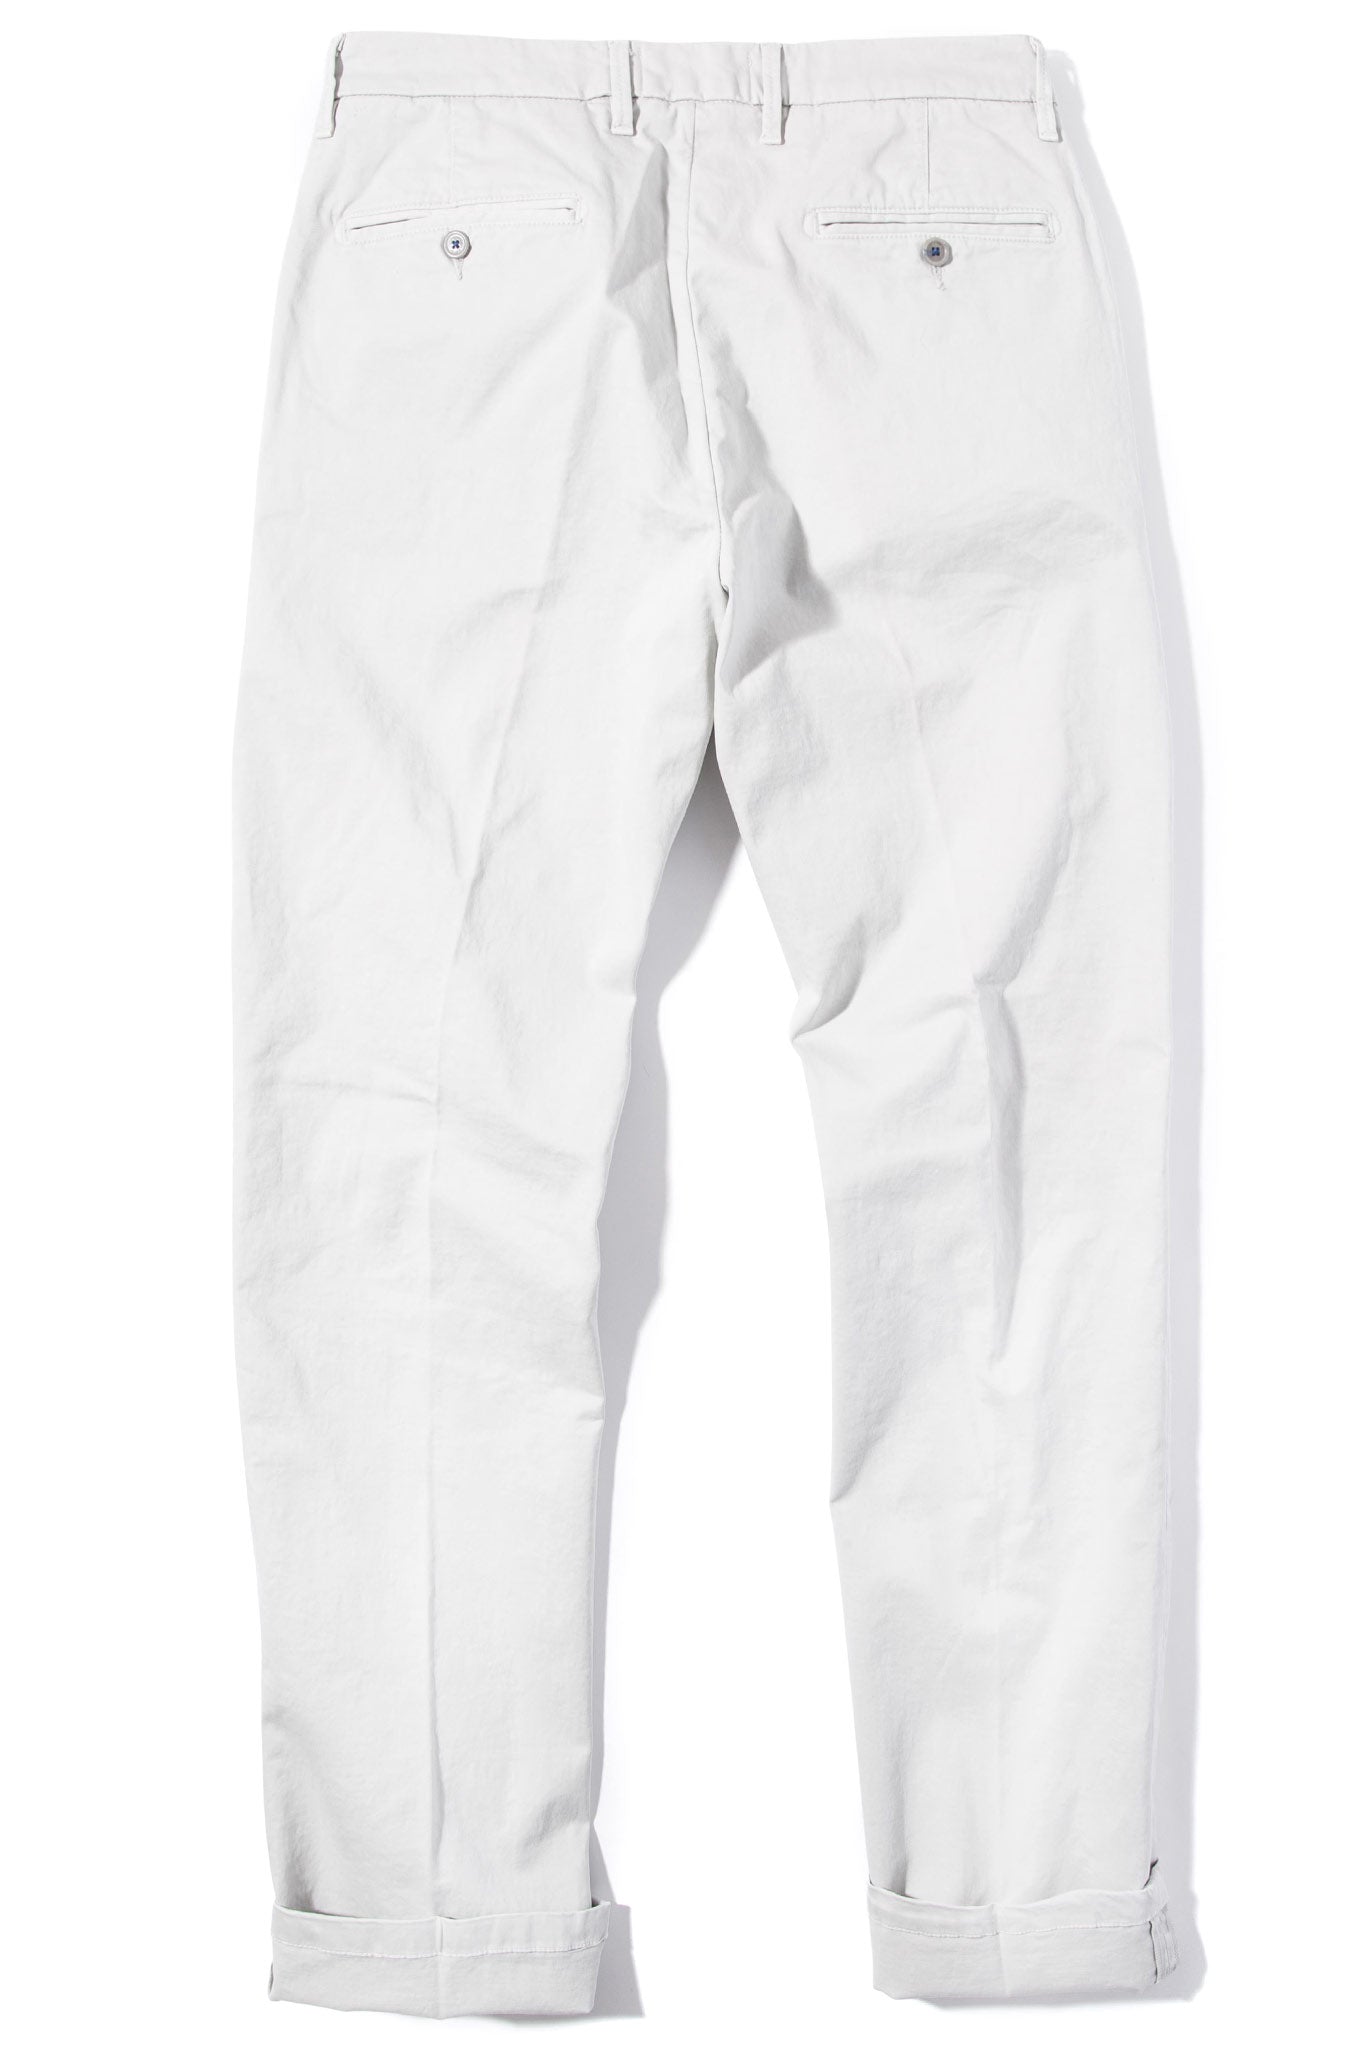 Routt Soft Touch Chino In Sasso | Mens - Pants - 4 Pocket | Teleria Zed